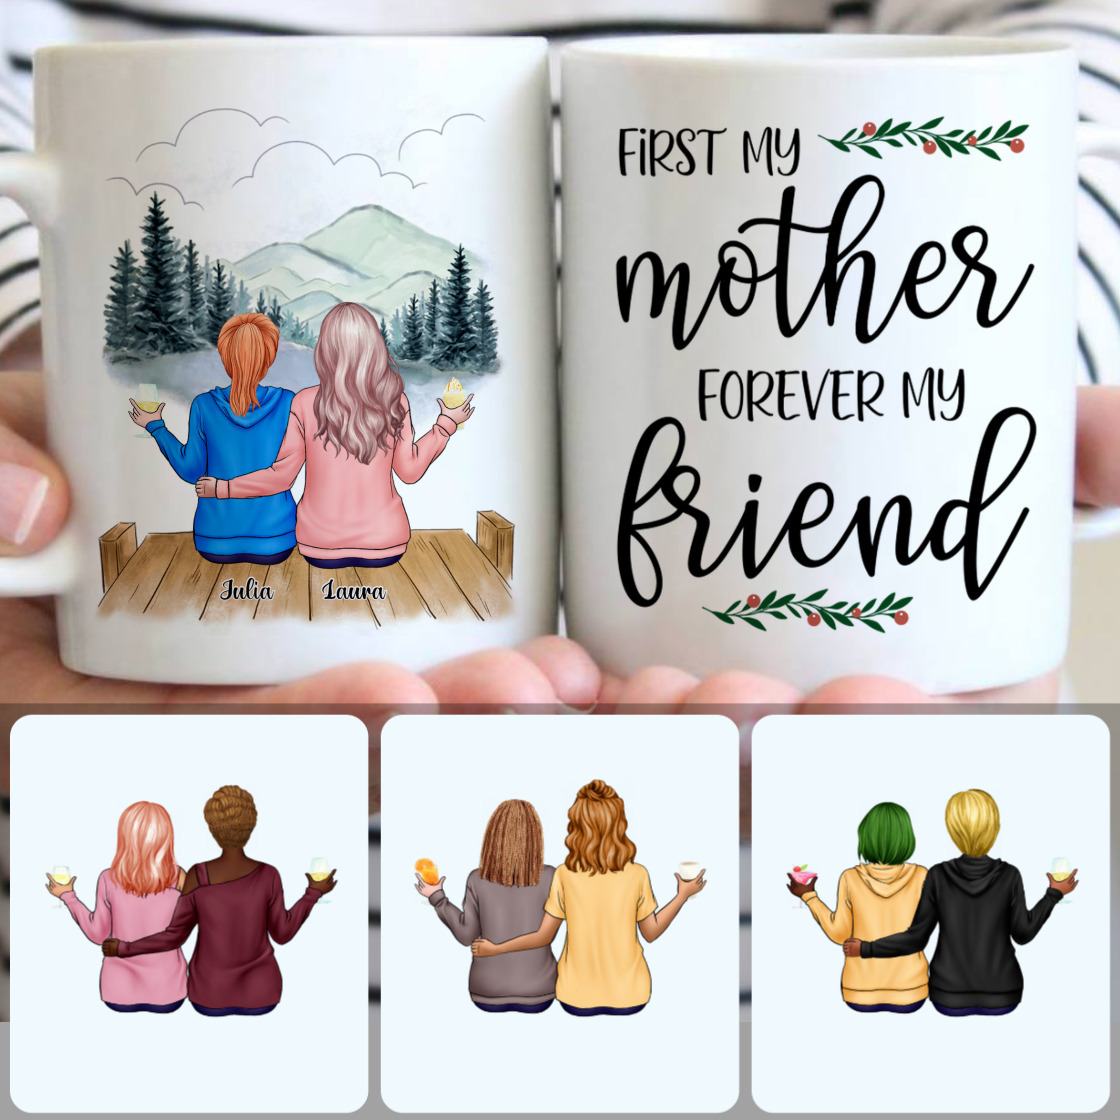 Personalized Mug, Unique Mother's Day Gifts, Mother & Daughter Customized Coffee Mug With Names